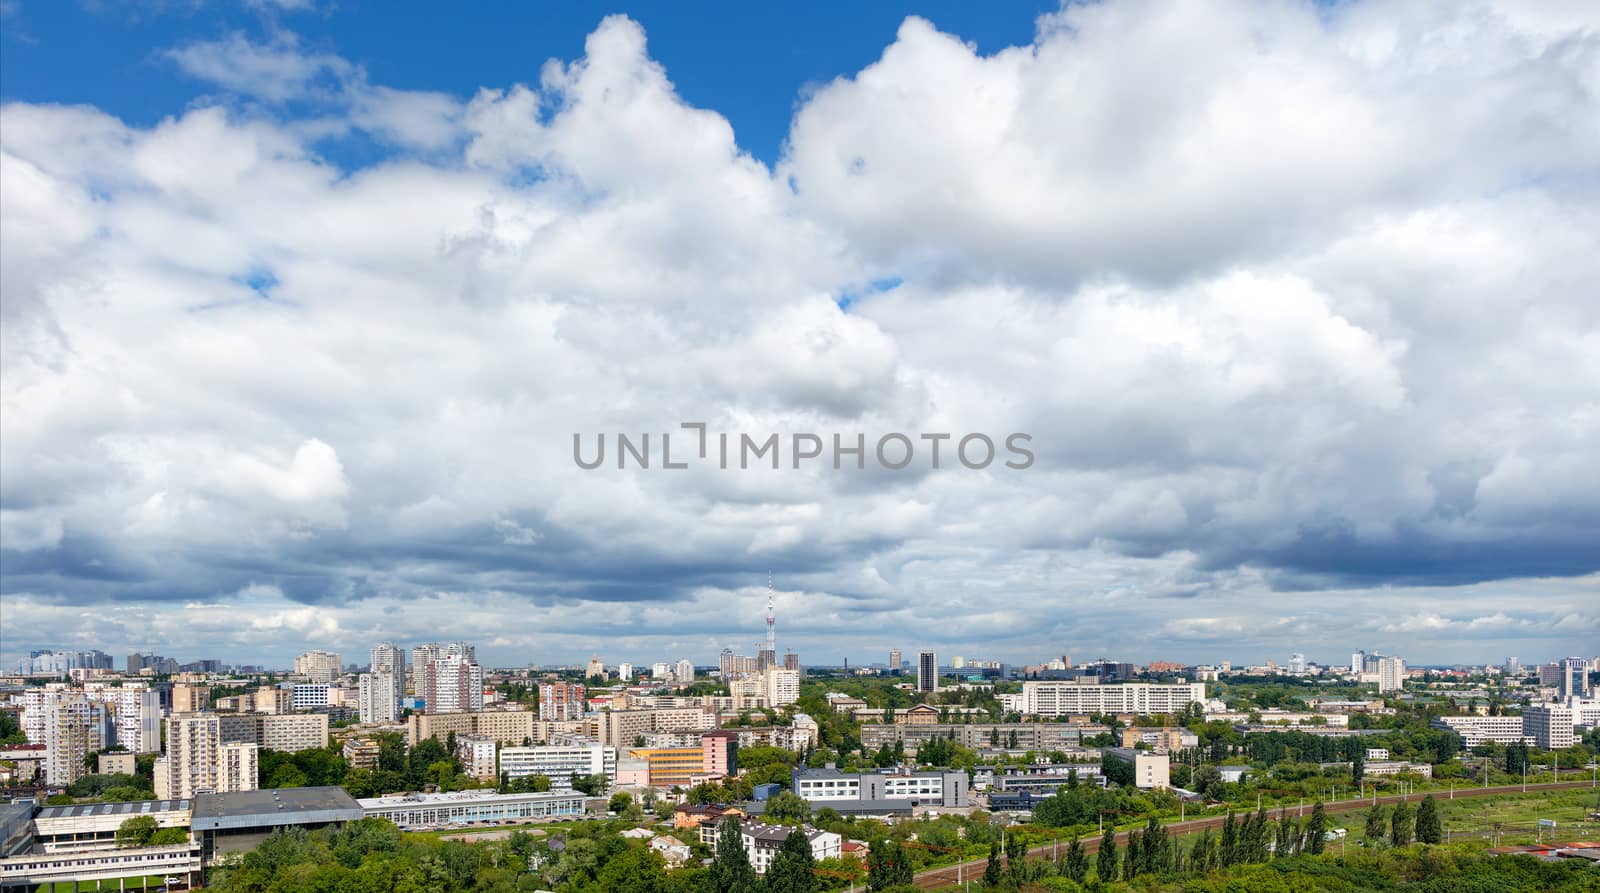 Large gray and white clouds loomed over Kyiv's residential areas, green parks and a television tower.